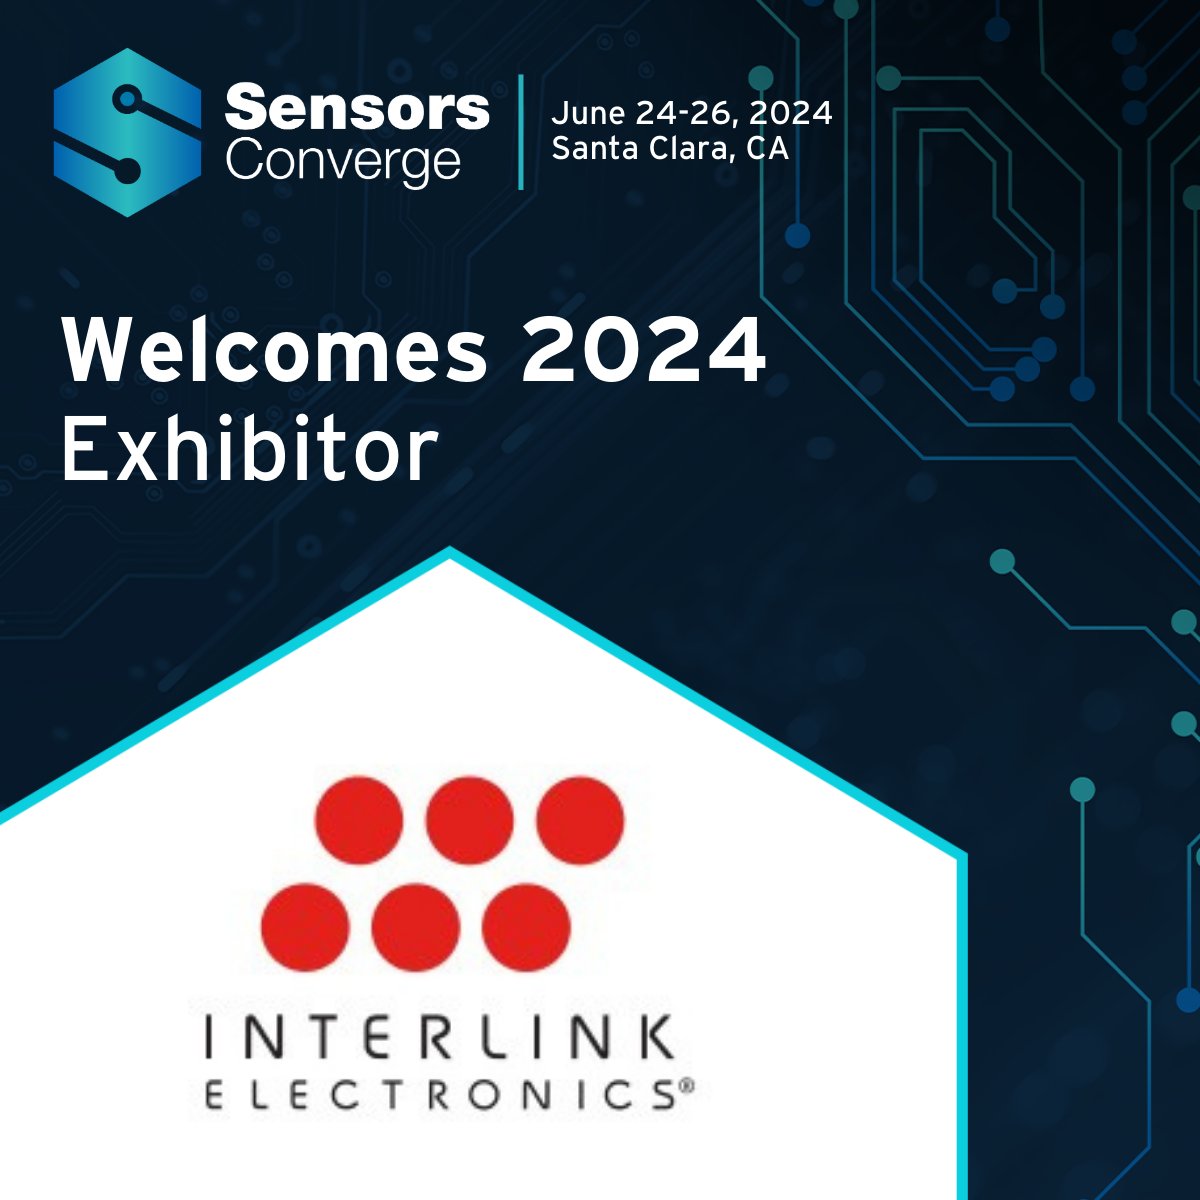 Welcome Interlink Electronics to #SensorsConverge Interlink is a trusted global leader in commercialization of printed electronics especially for force sensing in HMI applications. Learn more: interlinkelectronics.com Register: June 24-26 in Santa Clara sensorsconverge.com/sensorsconverg…